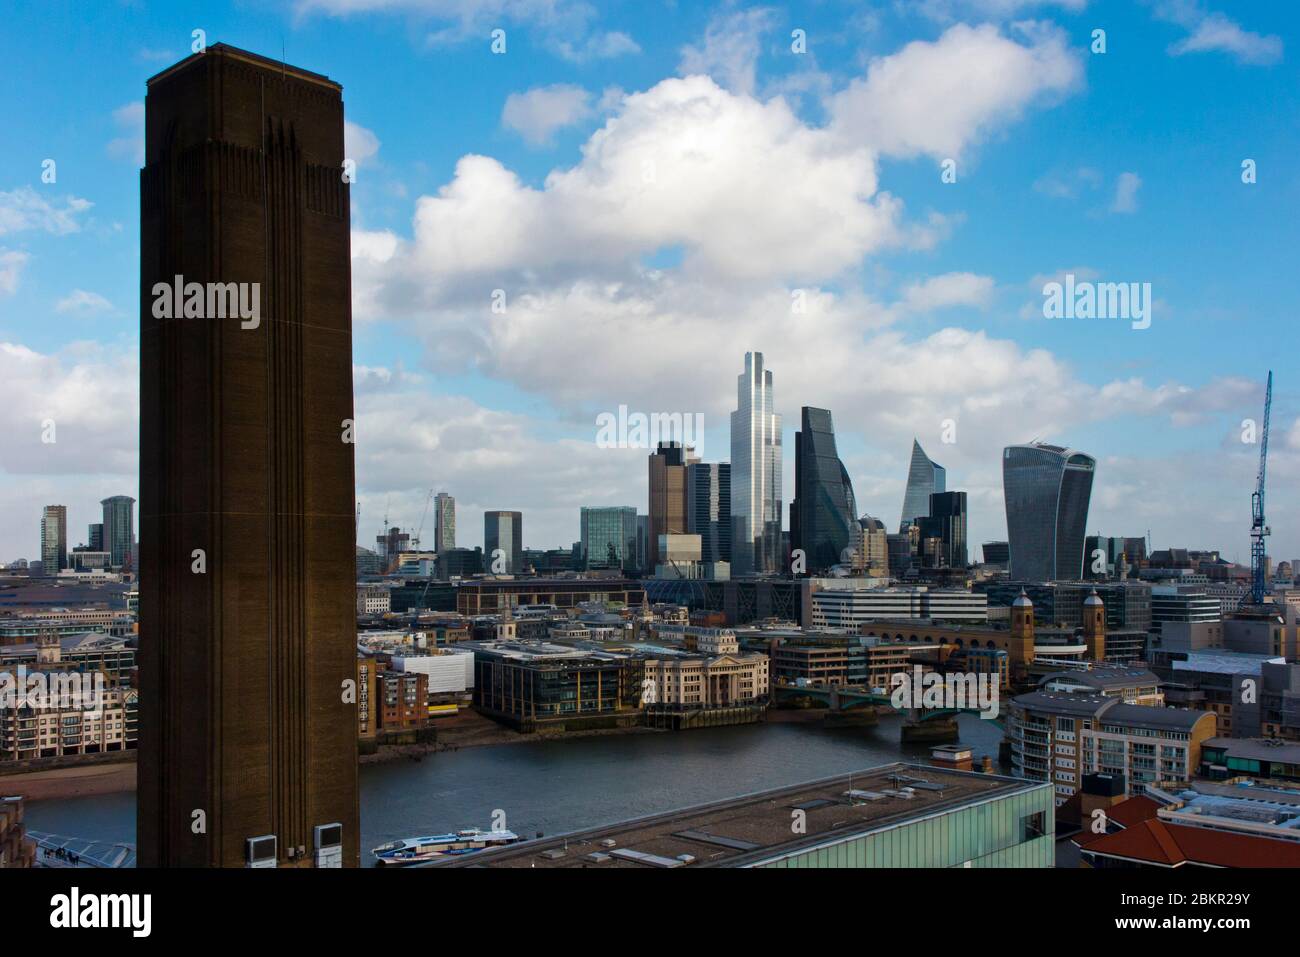 View of the City of London financial district skyline with the chimney block of the Tate Modern Art Gallery in the foreground. Stock Photo